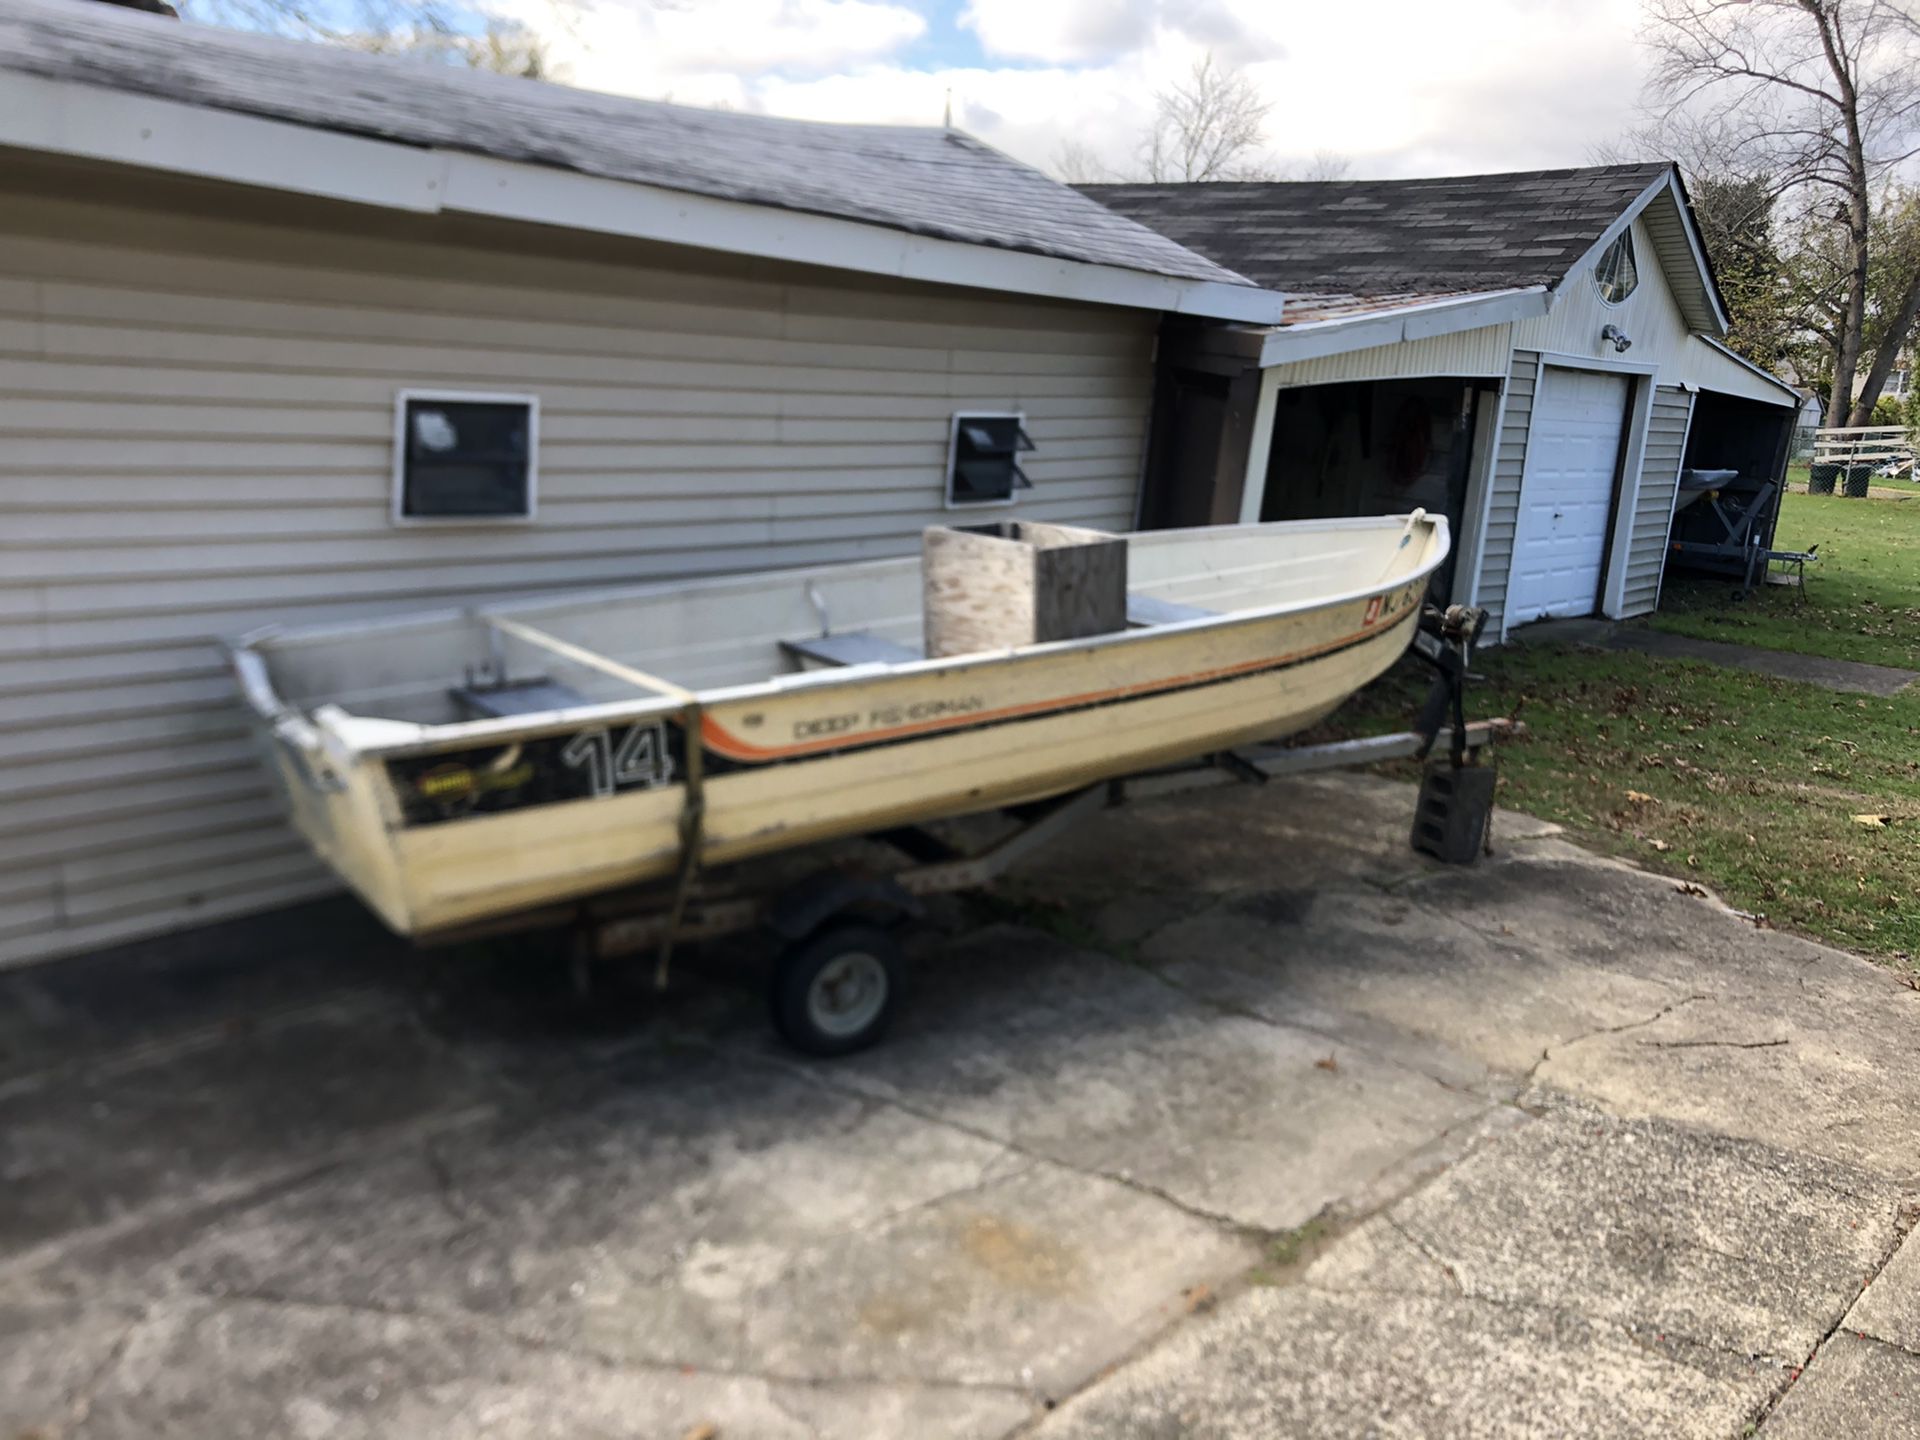 14 Foot Aliminum Boat & Trailer. Good condition. Formerly used by county to inspect bridges. No title